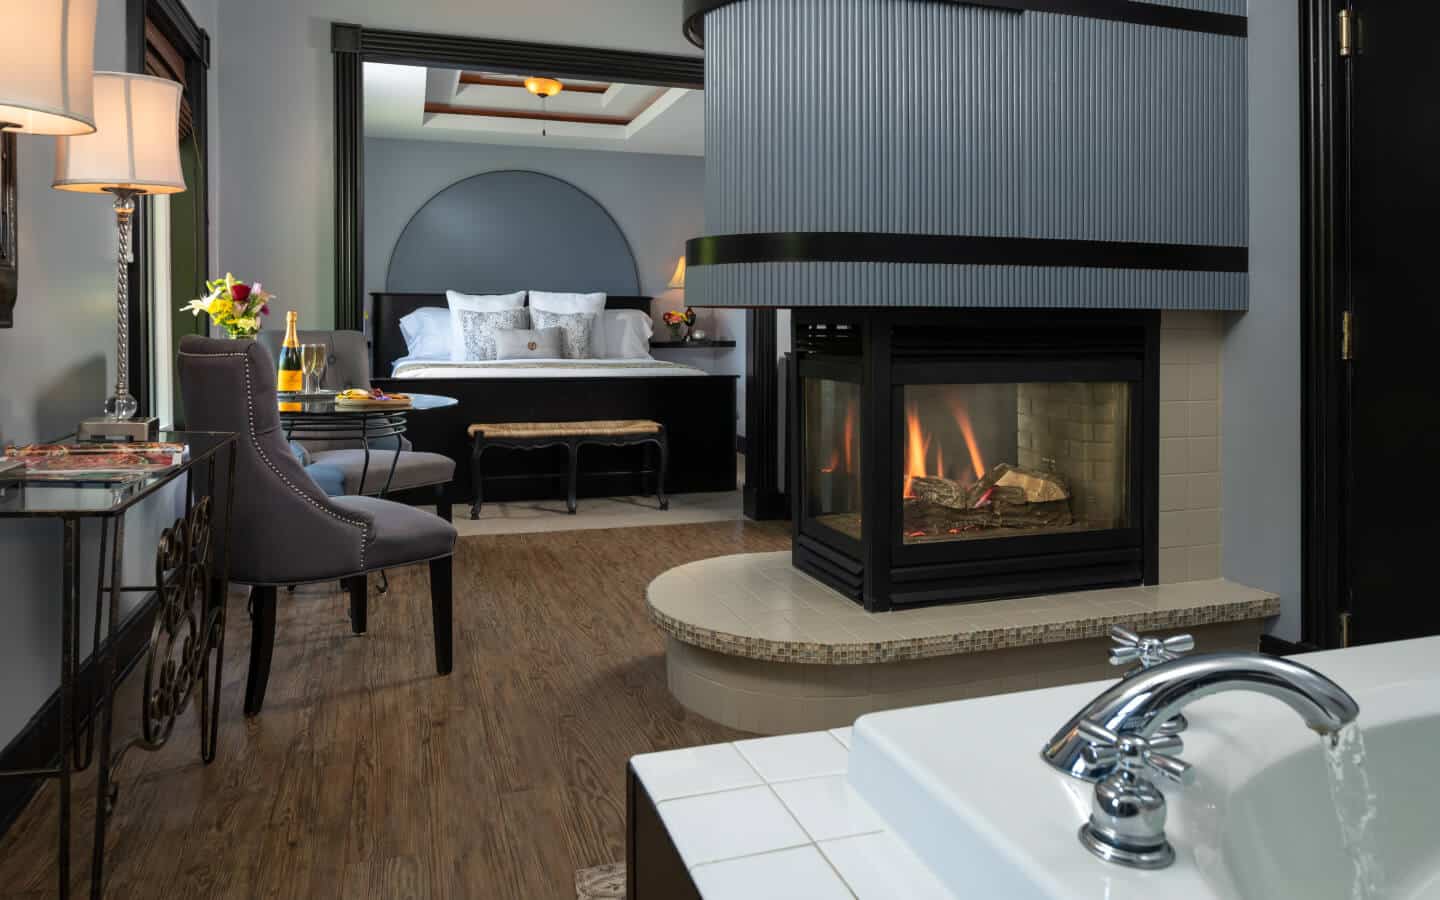 The Sir Lancelot Suite, perfect for your next romantic getaway in Michigan